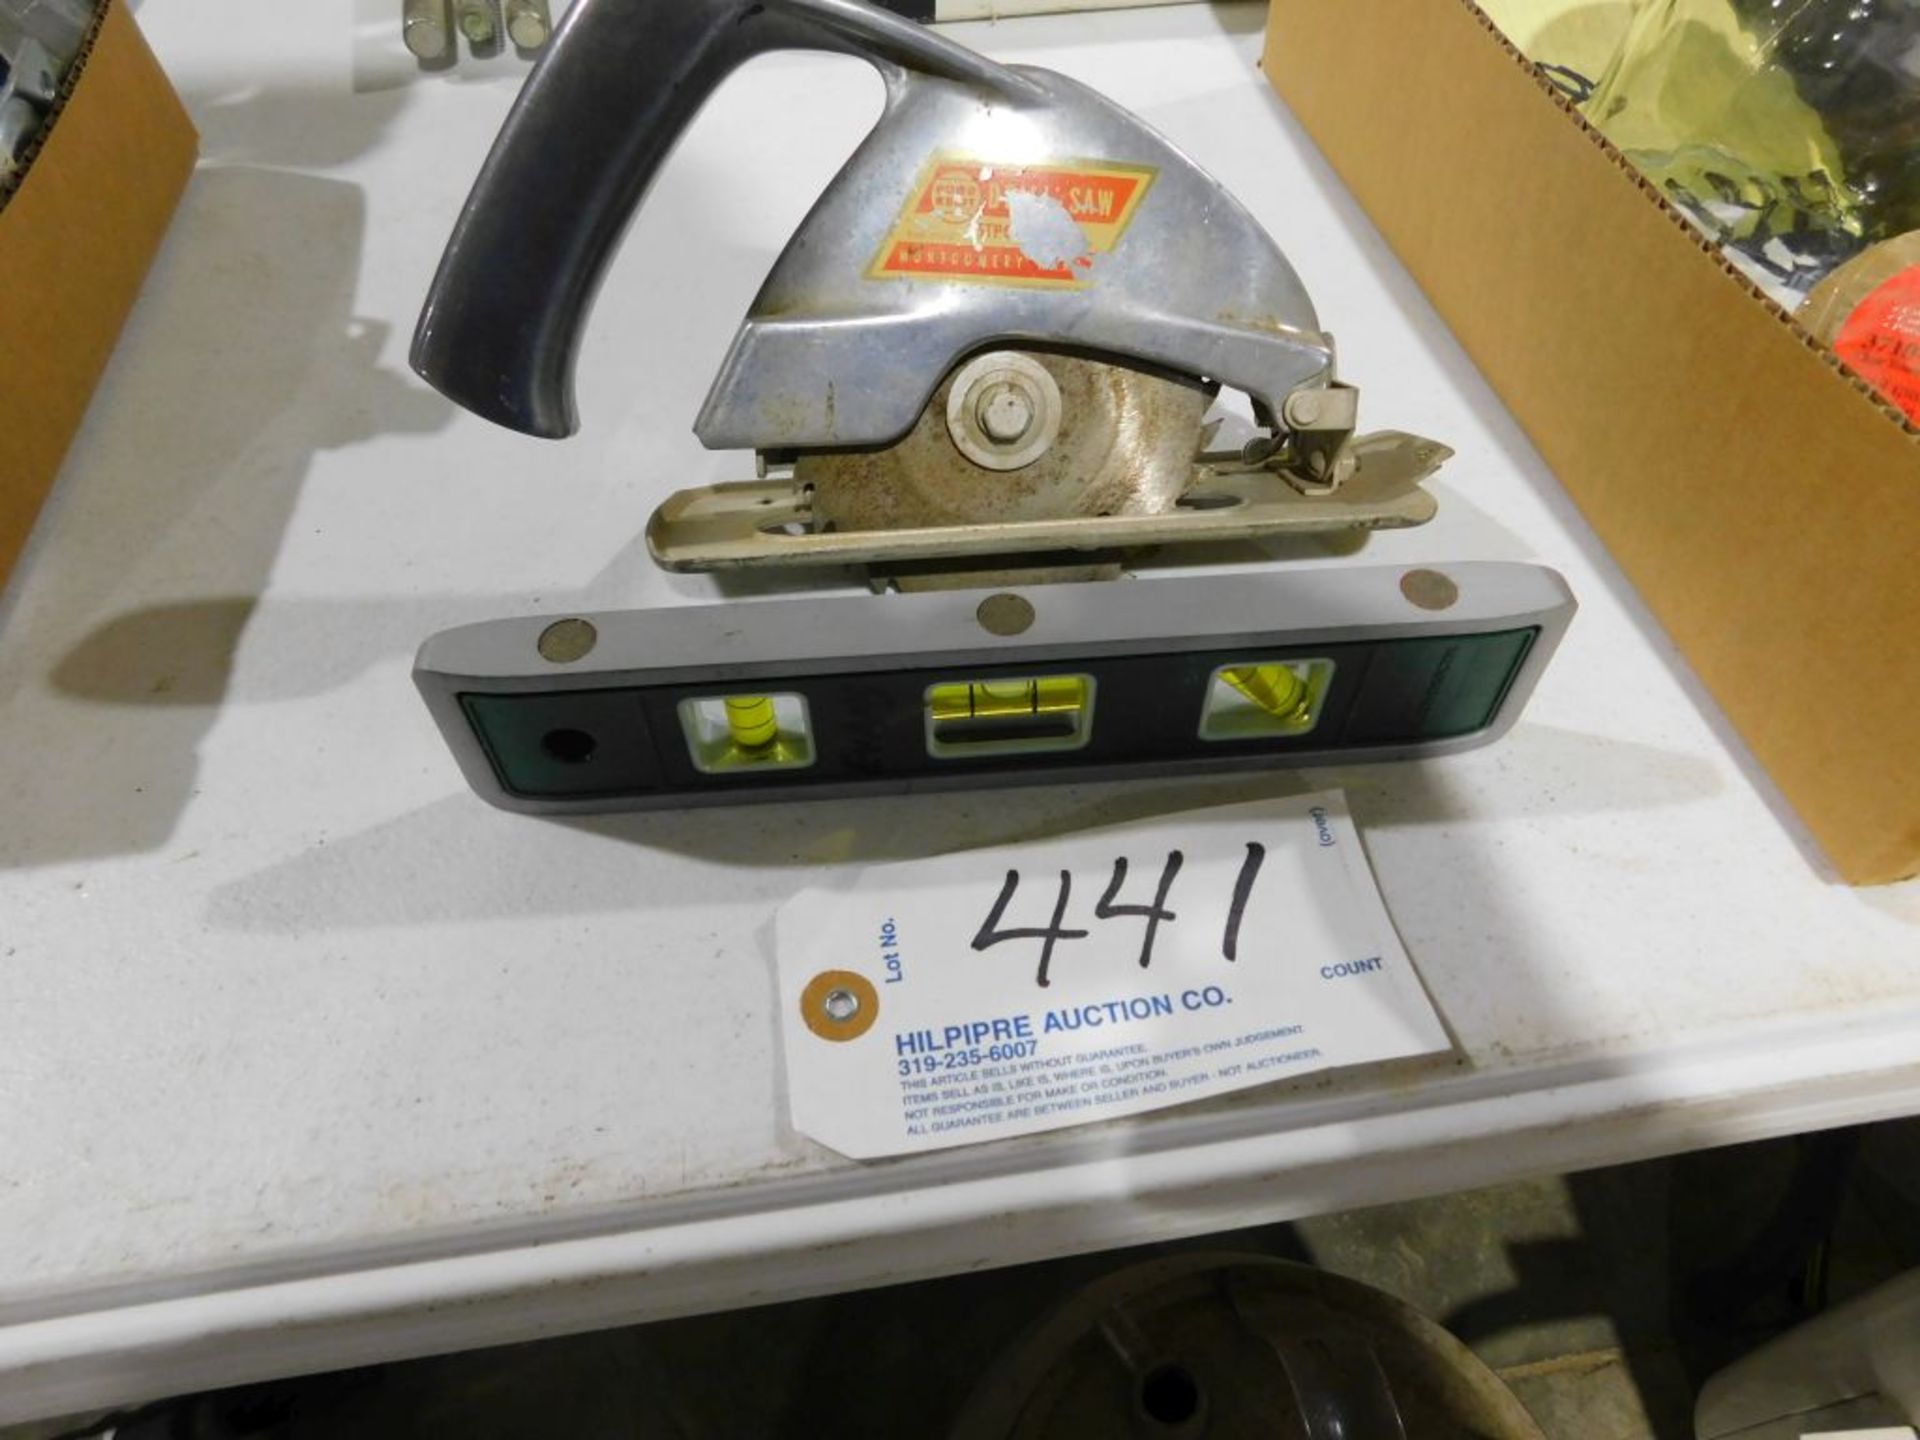 Power Kraft saw. (Located at and to be picked up at: 2862 Wagner Rd., Waterloo, IA)